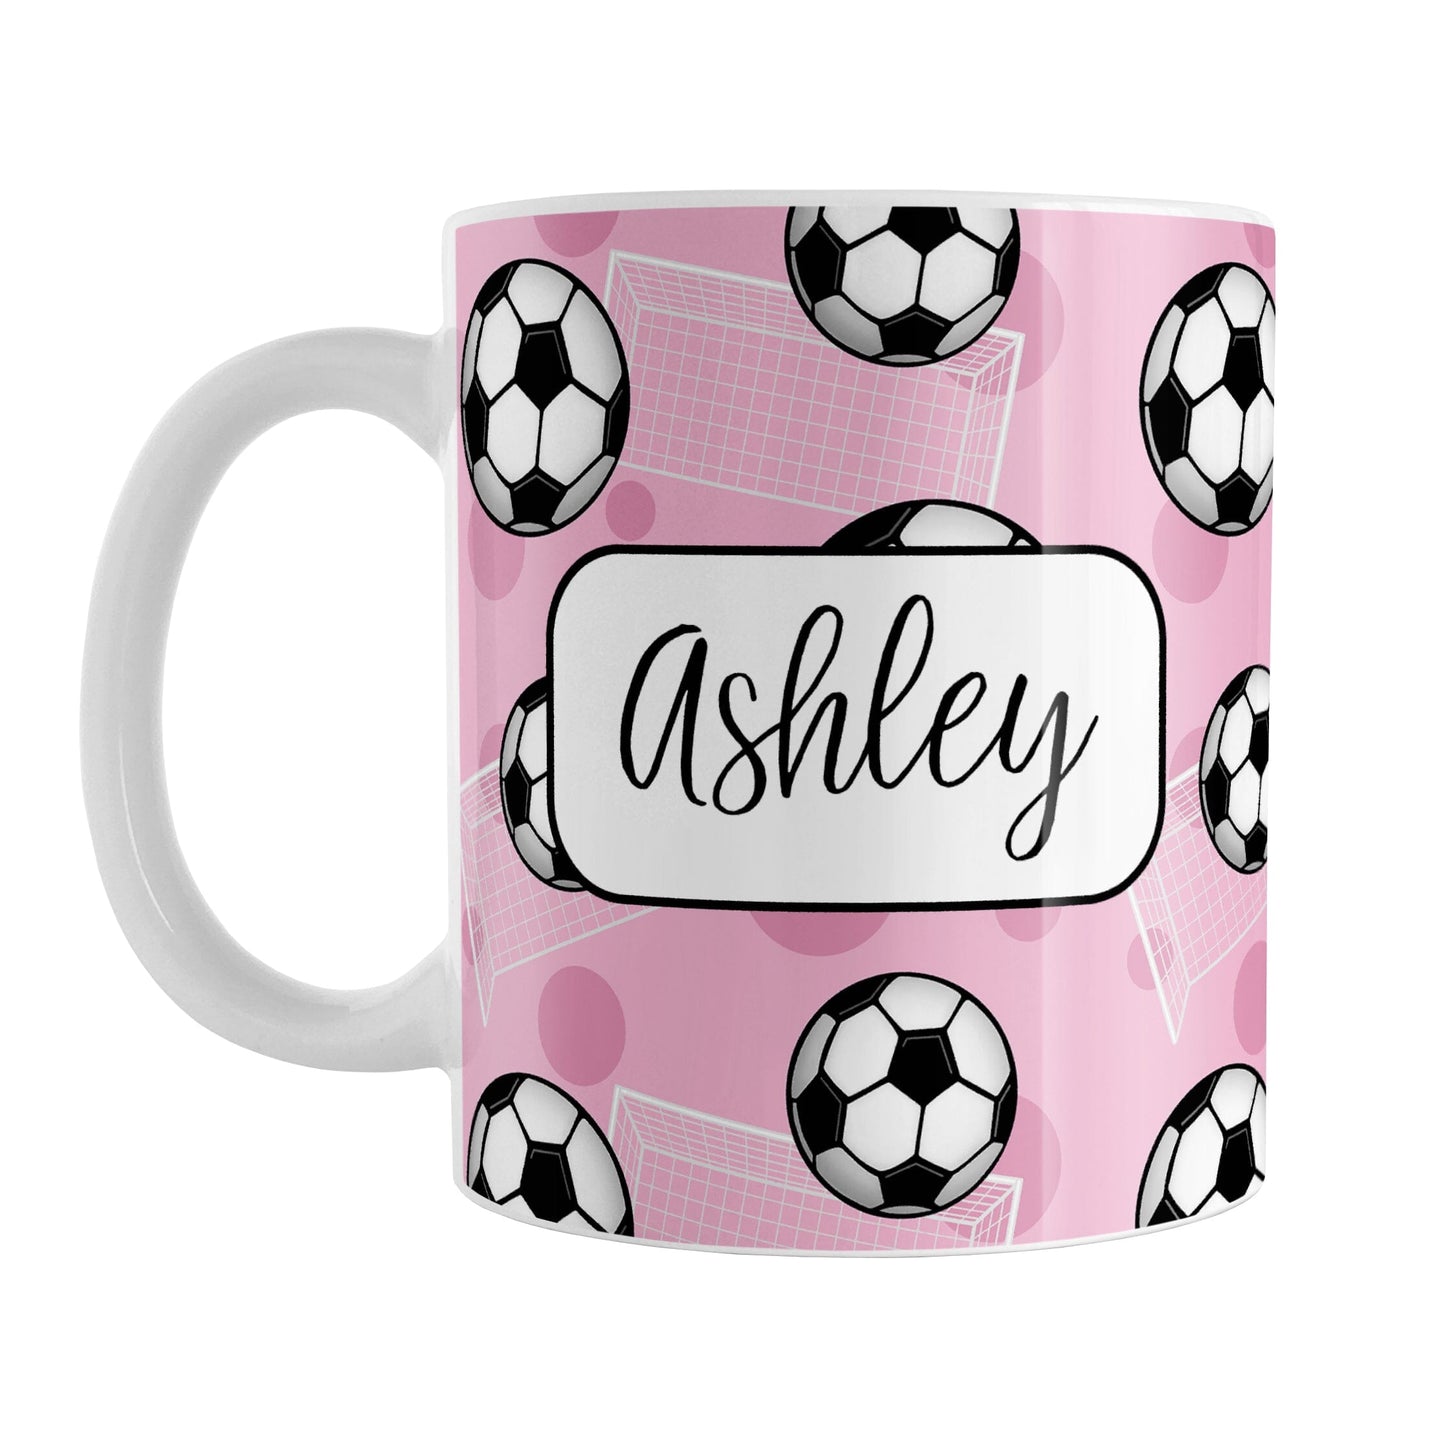 Soccer Ball and Goal Personalized Pink Soccer Mug (11oz) at Amy's Coffee Mugs. A ceramic coffee mug designed with a pattern of soccer balls and white soccer goals over a pink background with pink circles. Your personalized name is custom-printed in a fun black script font on both sides of the mug over the soccer pattern. 